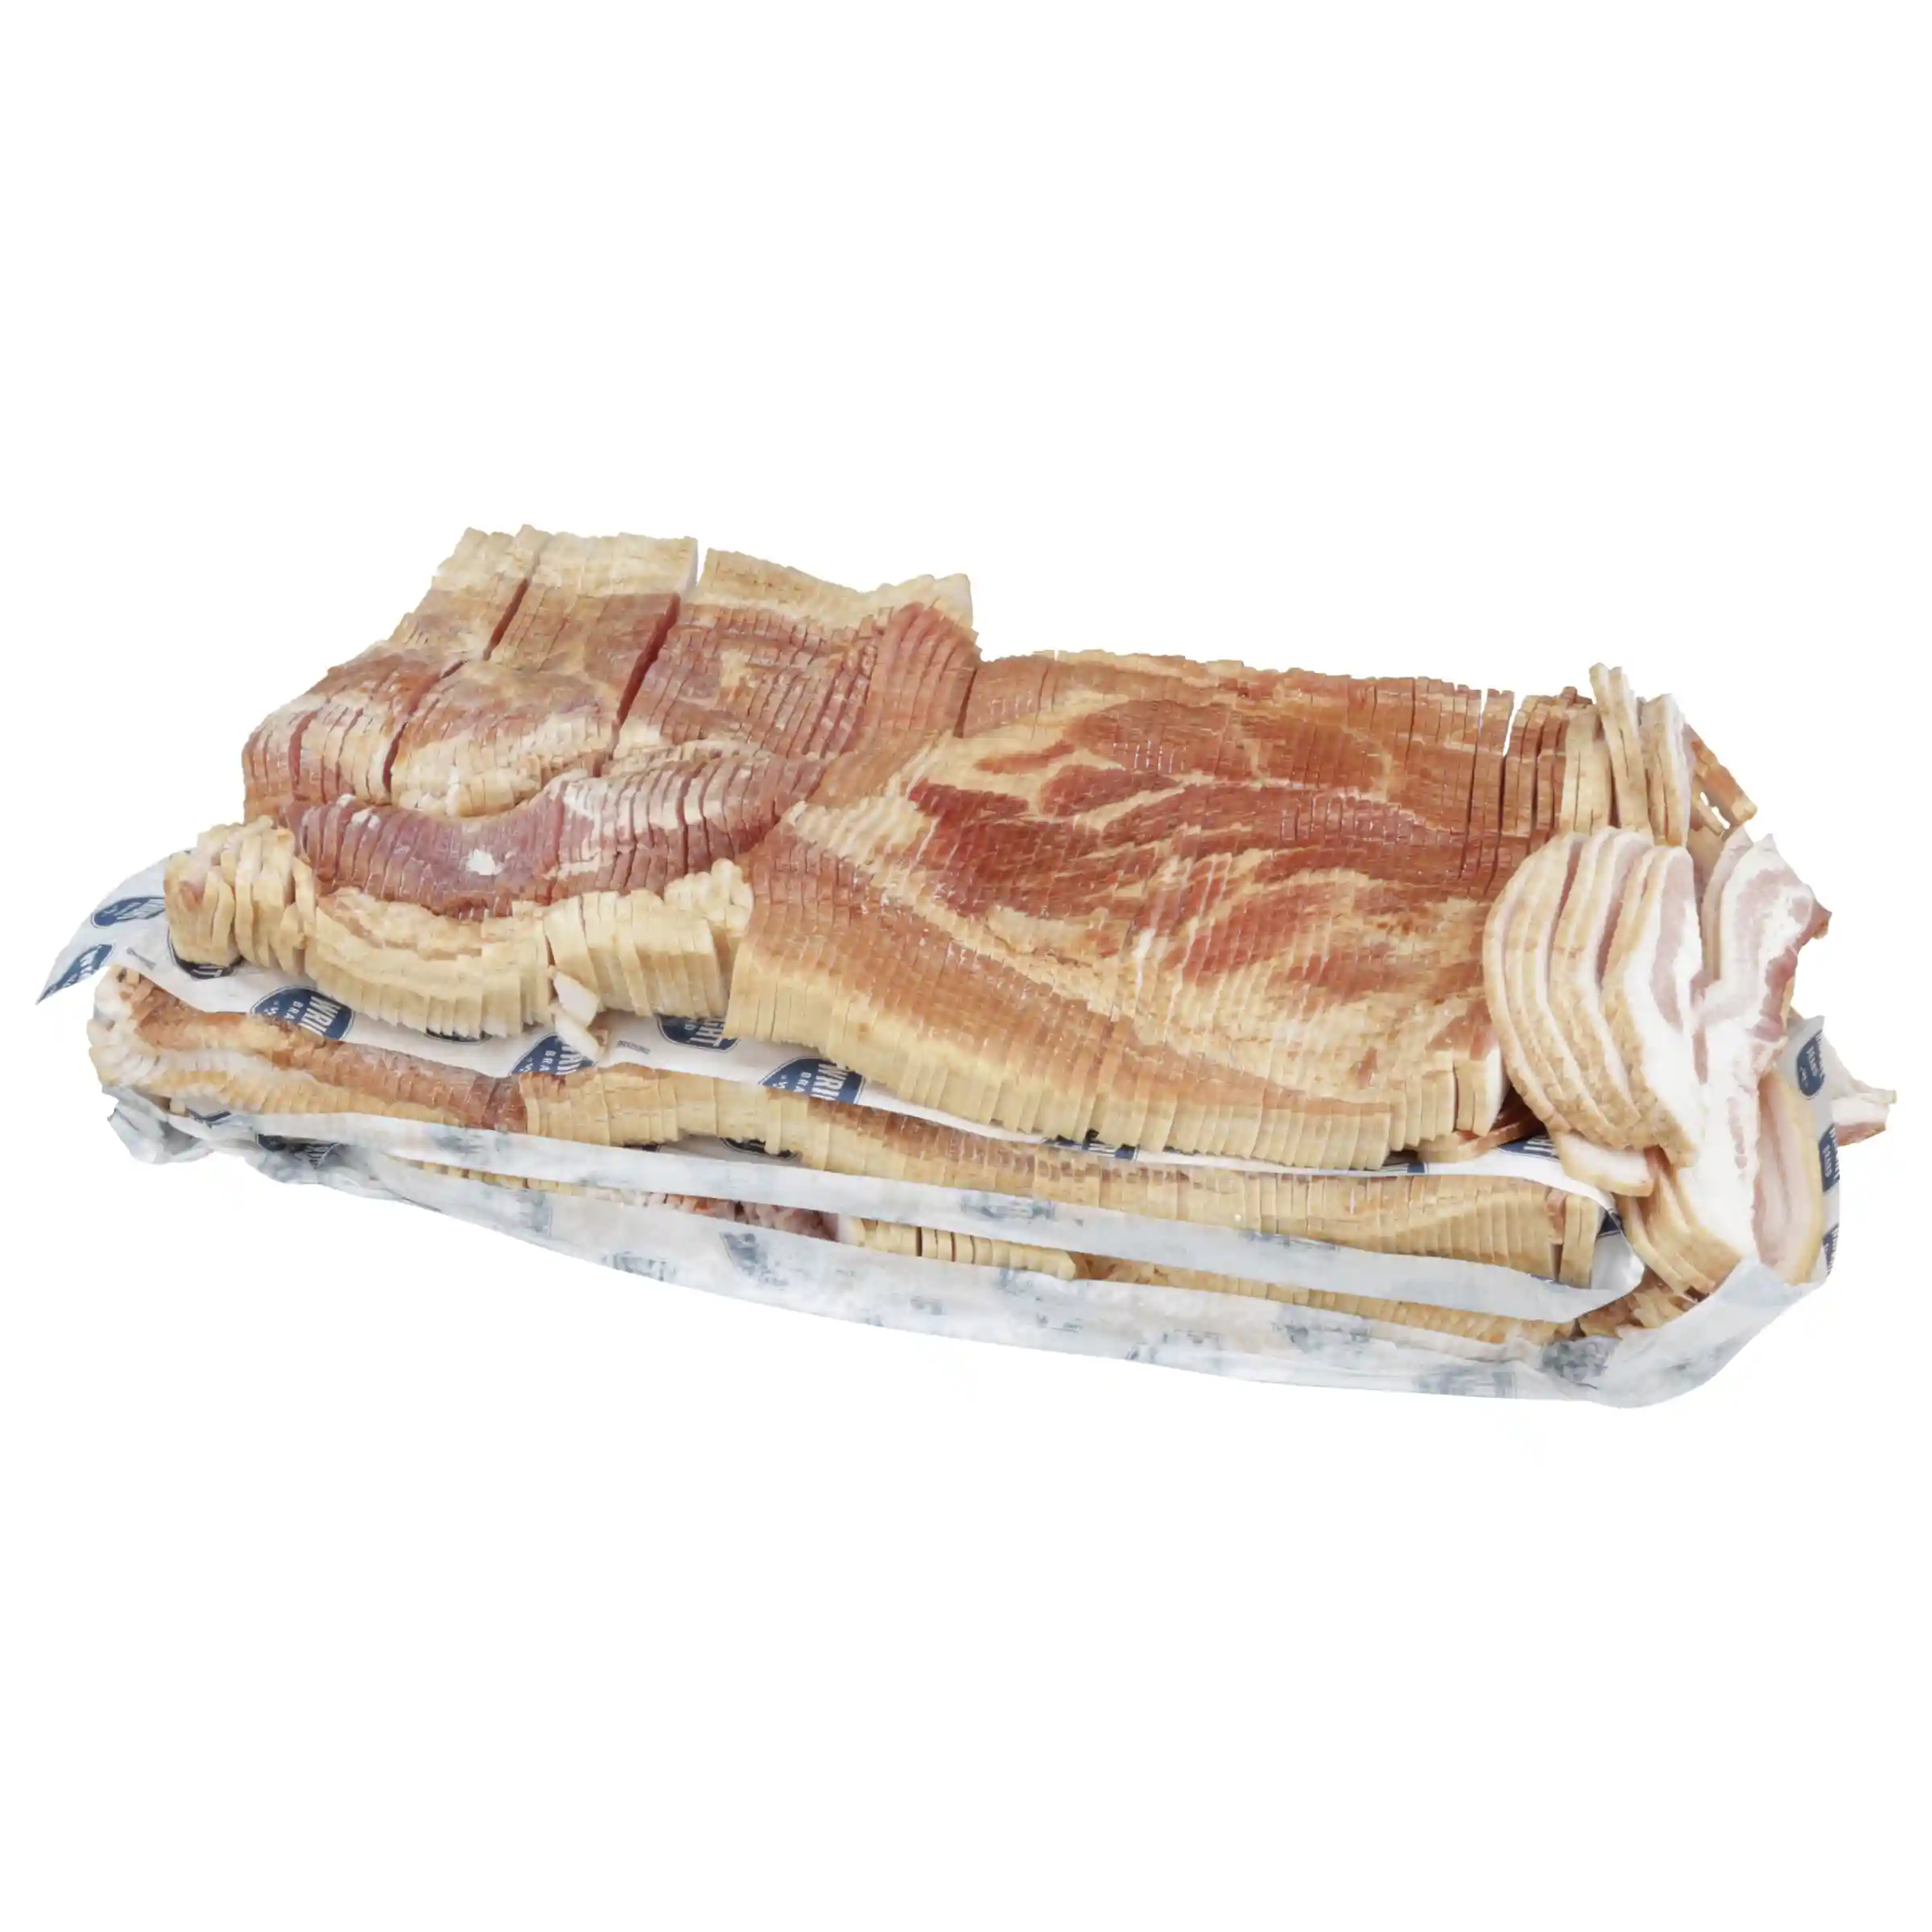 Wright® Brand Naturally Hickory Smoked Regular Sliced Bacon, Bulk, 33 Lbs, 6 Slices/Inch, Frozen_image_21